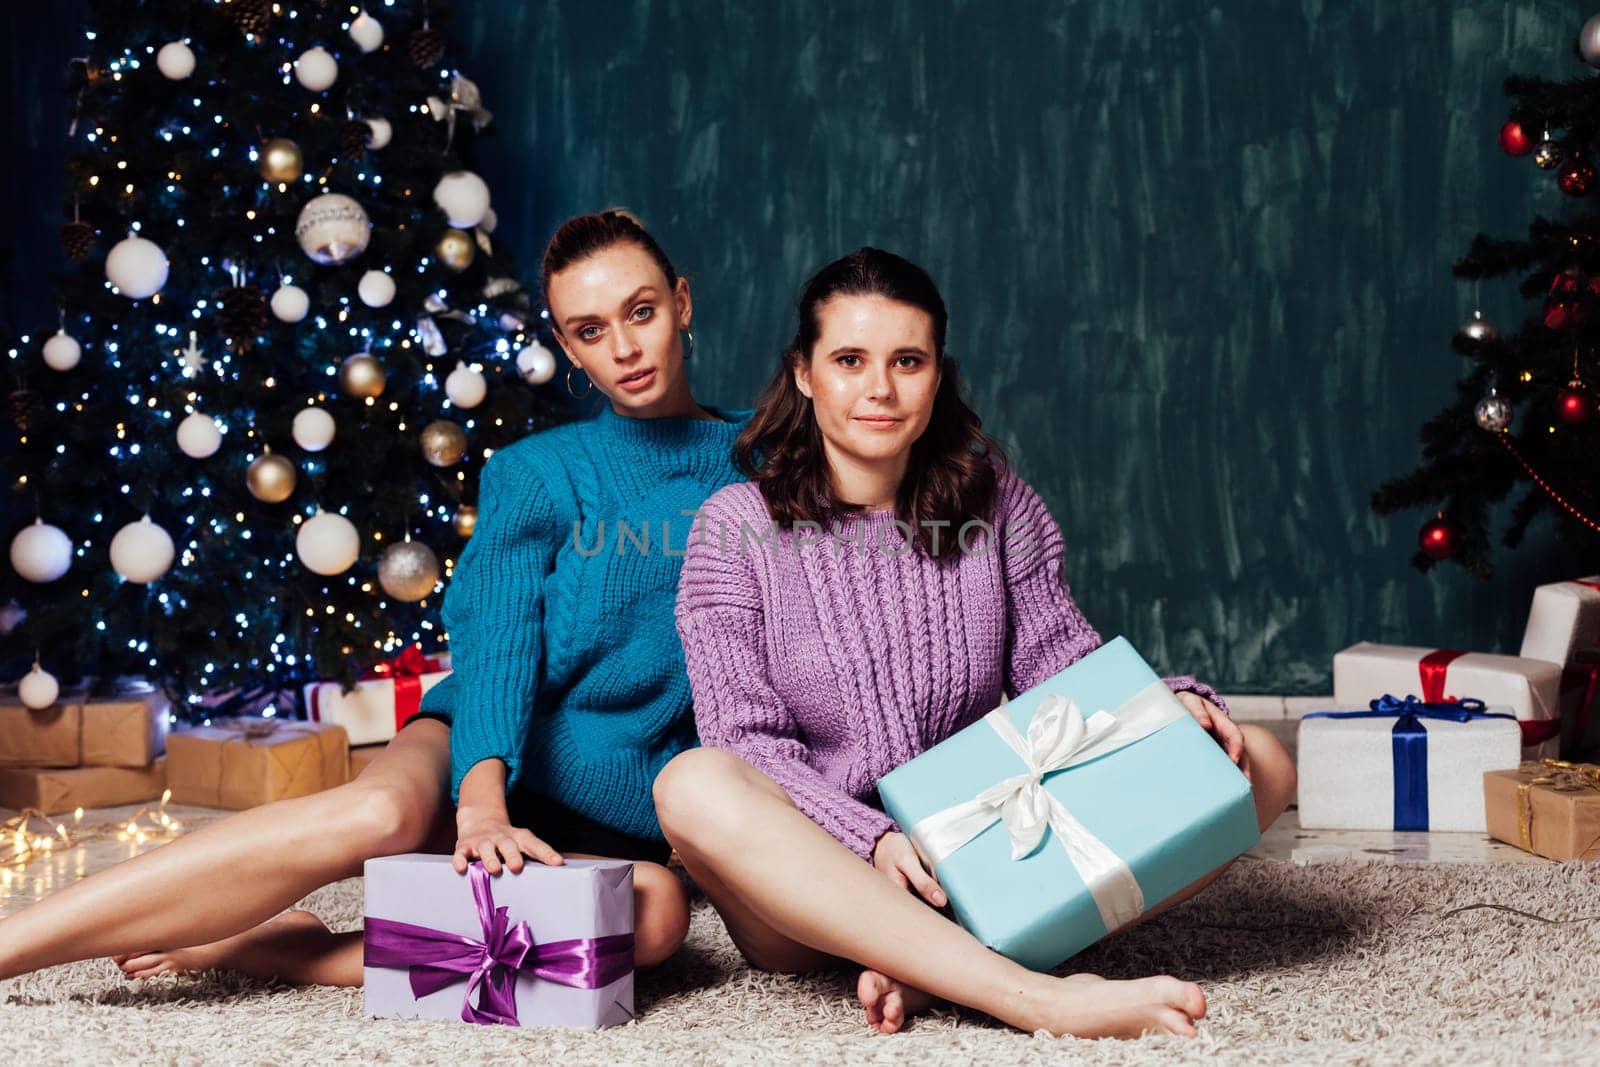 Two women with gifts at the Christmas tree for the new year